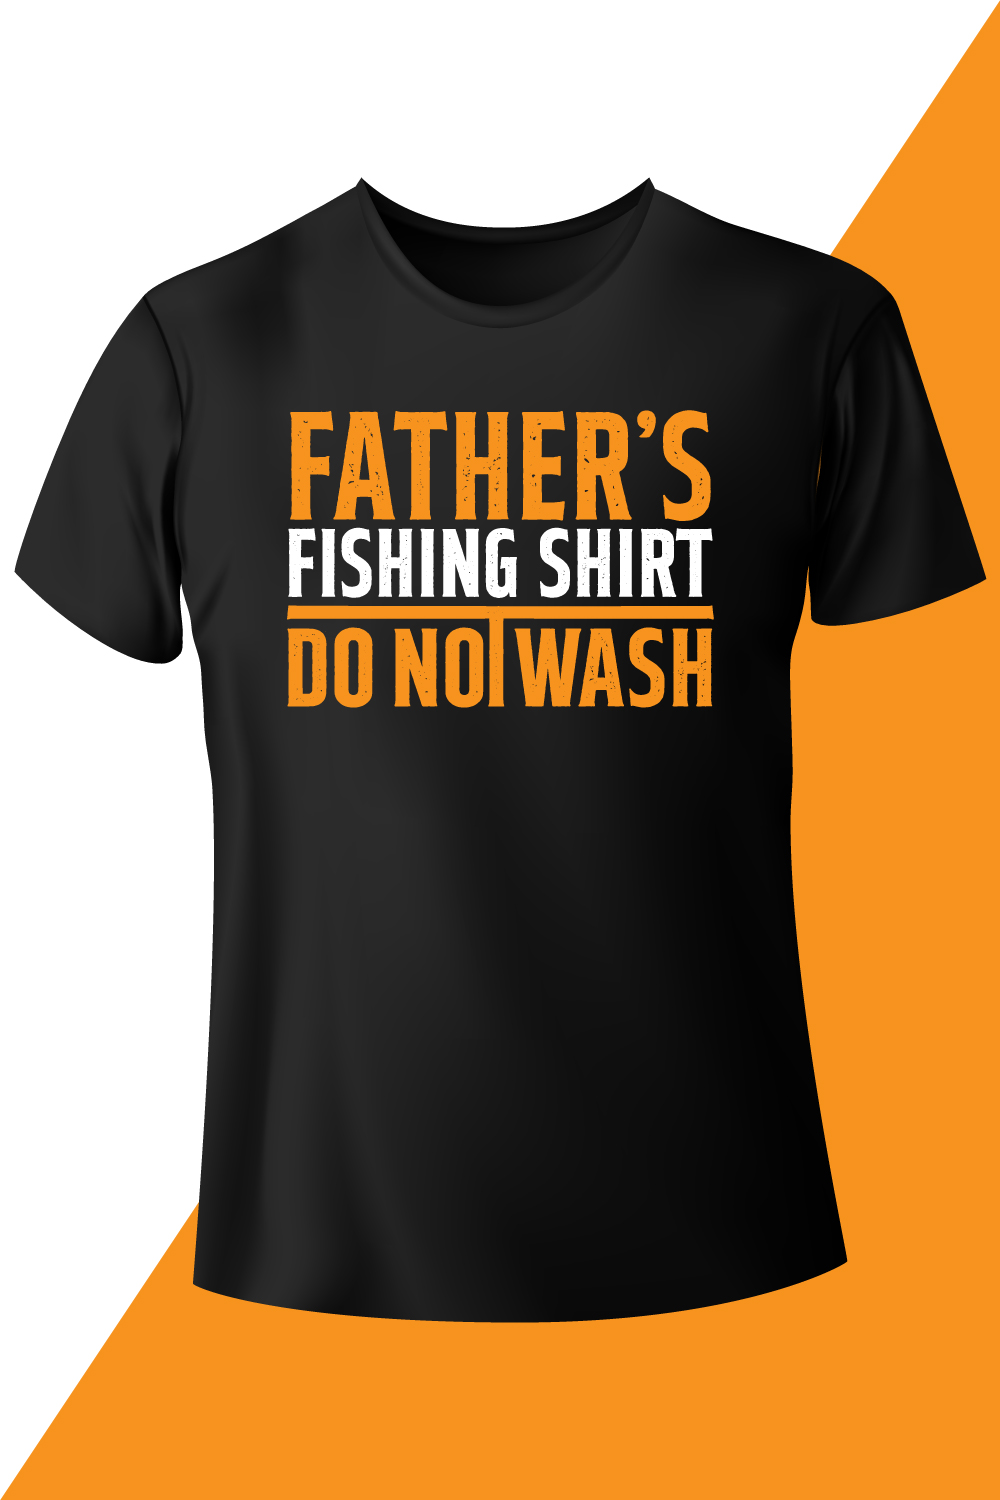 Image of a black t-shirt with a beautiful print Fathers Fishing Shirt Do Not Wash.